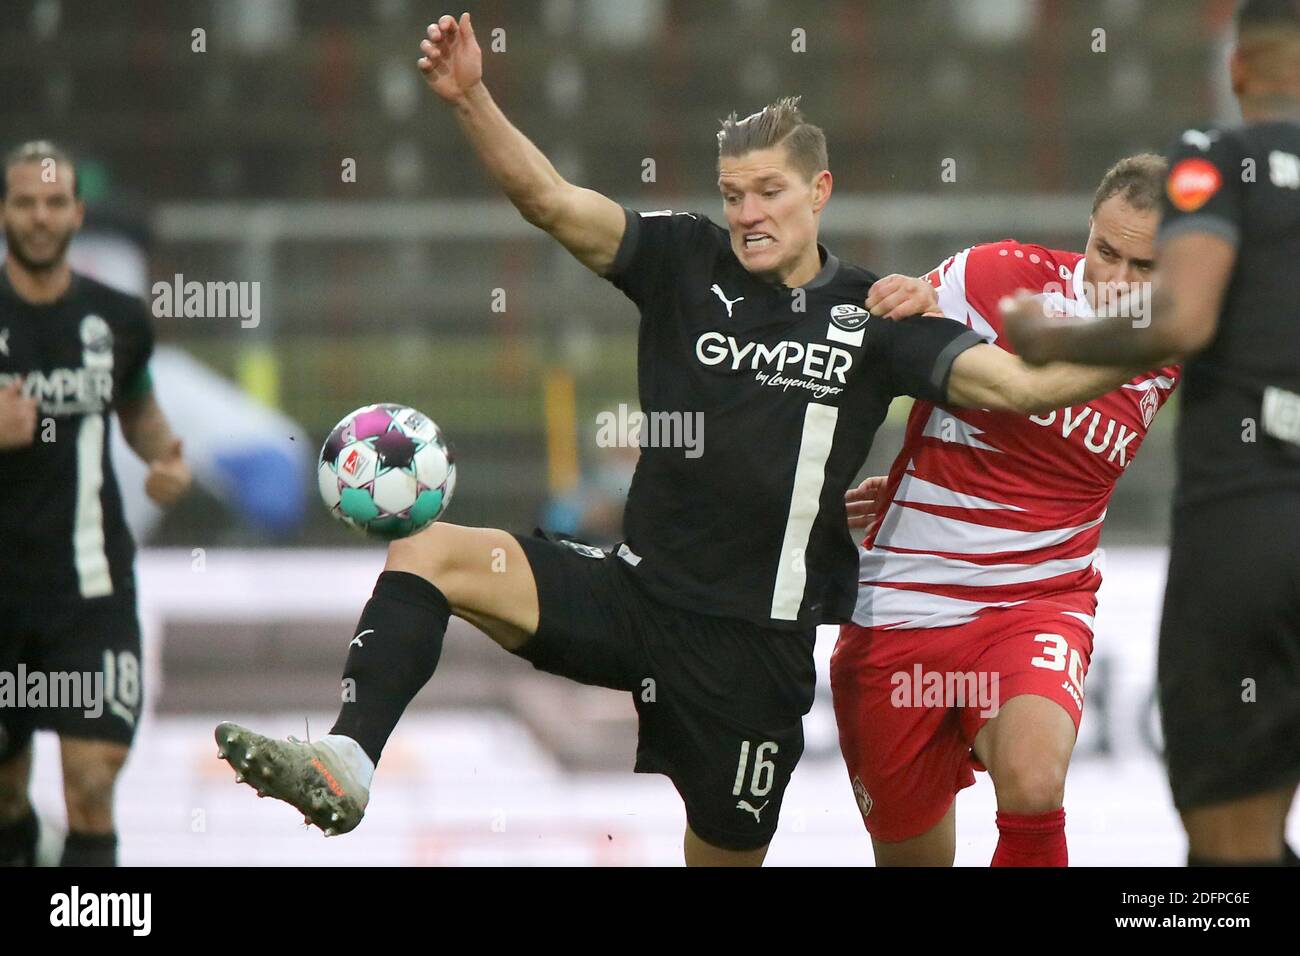 06 December 2020, Bavaria, Würzburg: Football: 2nd Bundesliga, Würzburger Kickers - SV Sandhausen, 10th matchday, in the Flyeralarm Arena. The Würzburger Ewerton (3rd from left) fights with Kevin Behrens (2nd from left) from Sandhausen for the ball. Photo: Daniel Karmann/dpa - IMPORTANT NOTE: In accordance with the regulations of the DFL Deutsche Fußball Liga and the DFB Deutscher Fußball-Bund, it is prohibited to exploit or have exploited in the stadium and/or from the game taken photographs in the form of sequence images and/or video-like photo series. Stock Photo